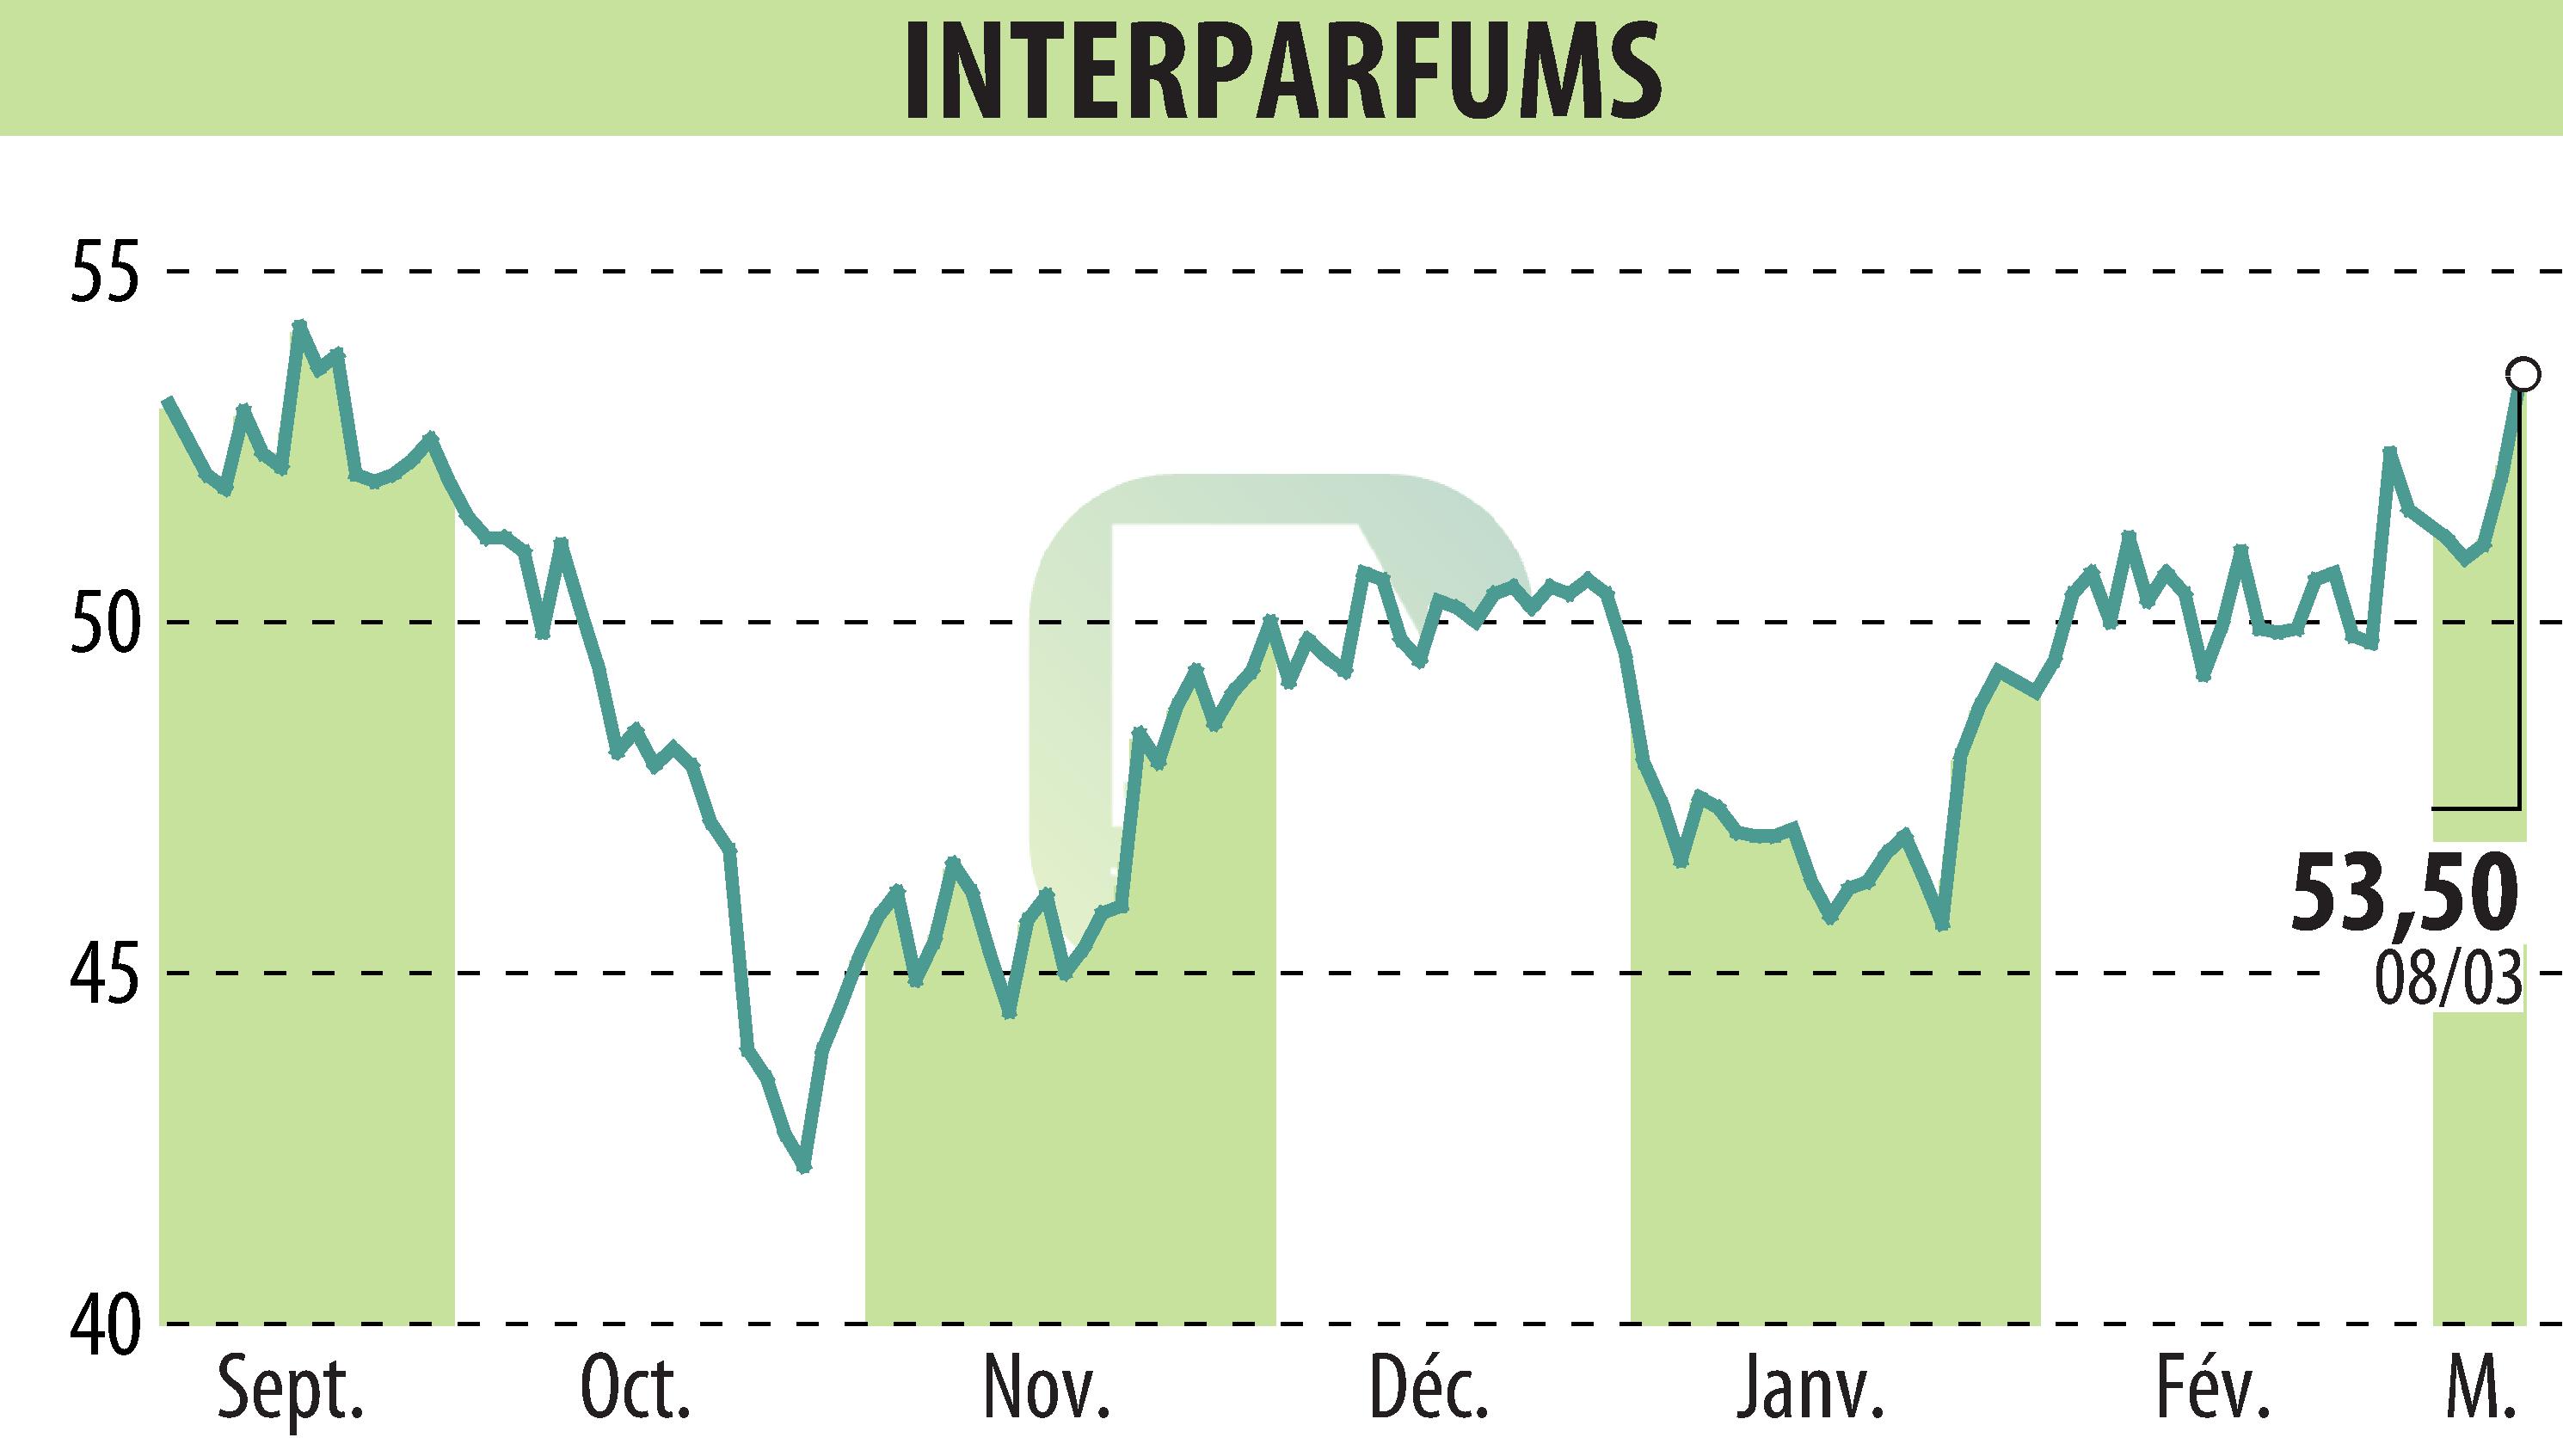 Stock price chart of INTER PARFUMS (EPA:ITP) showing fluctuations.